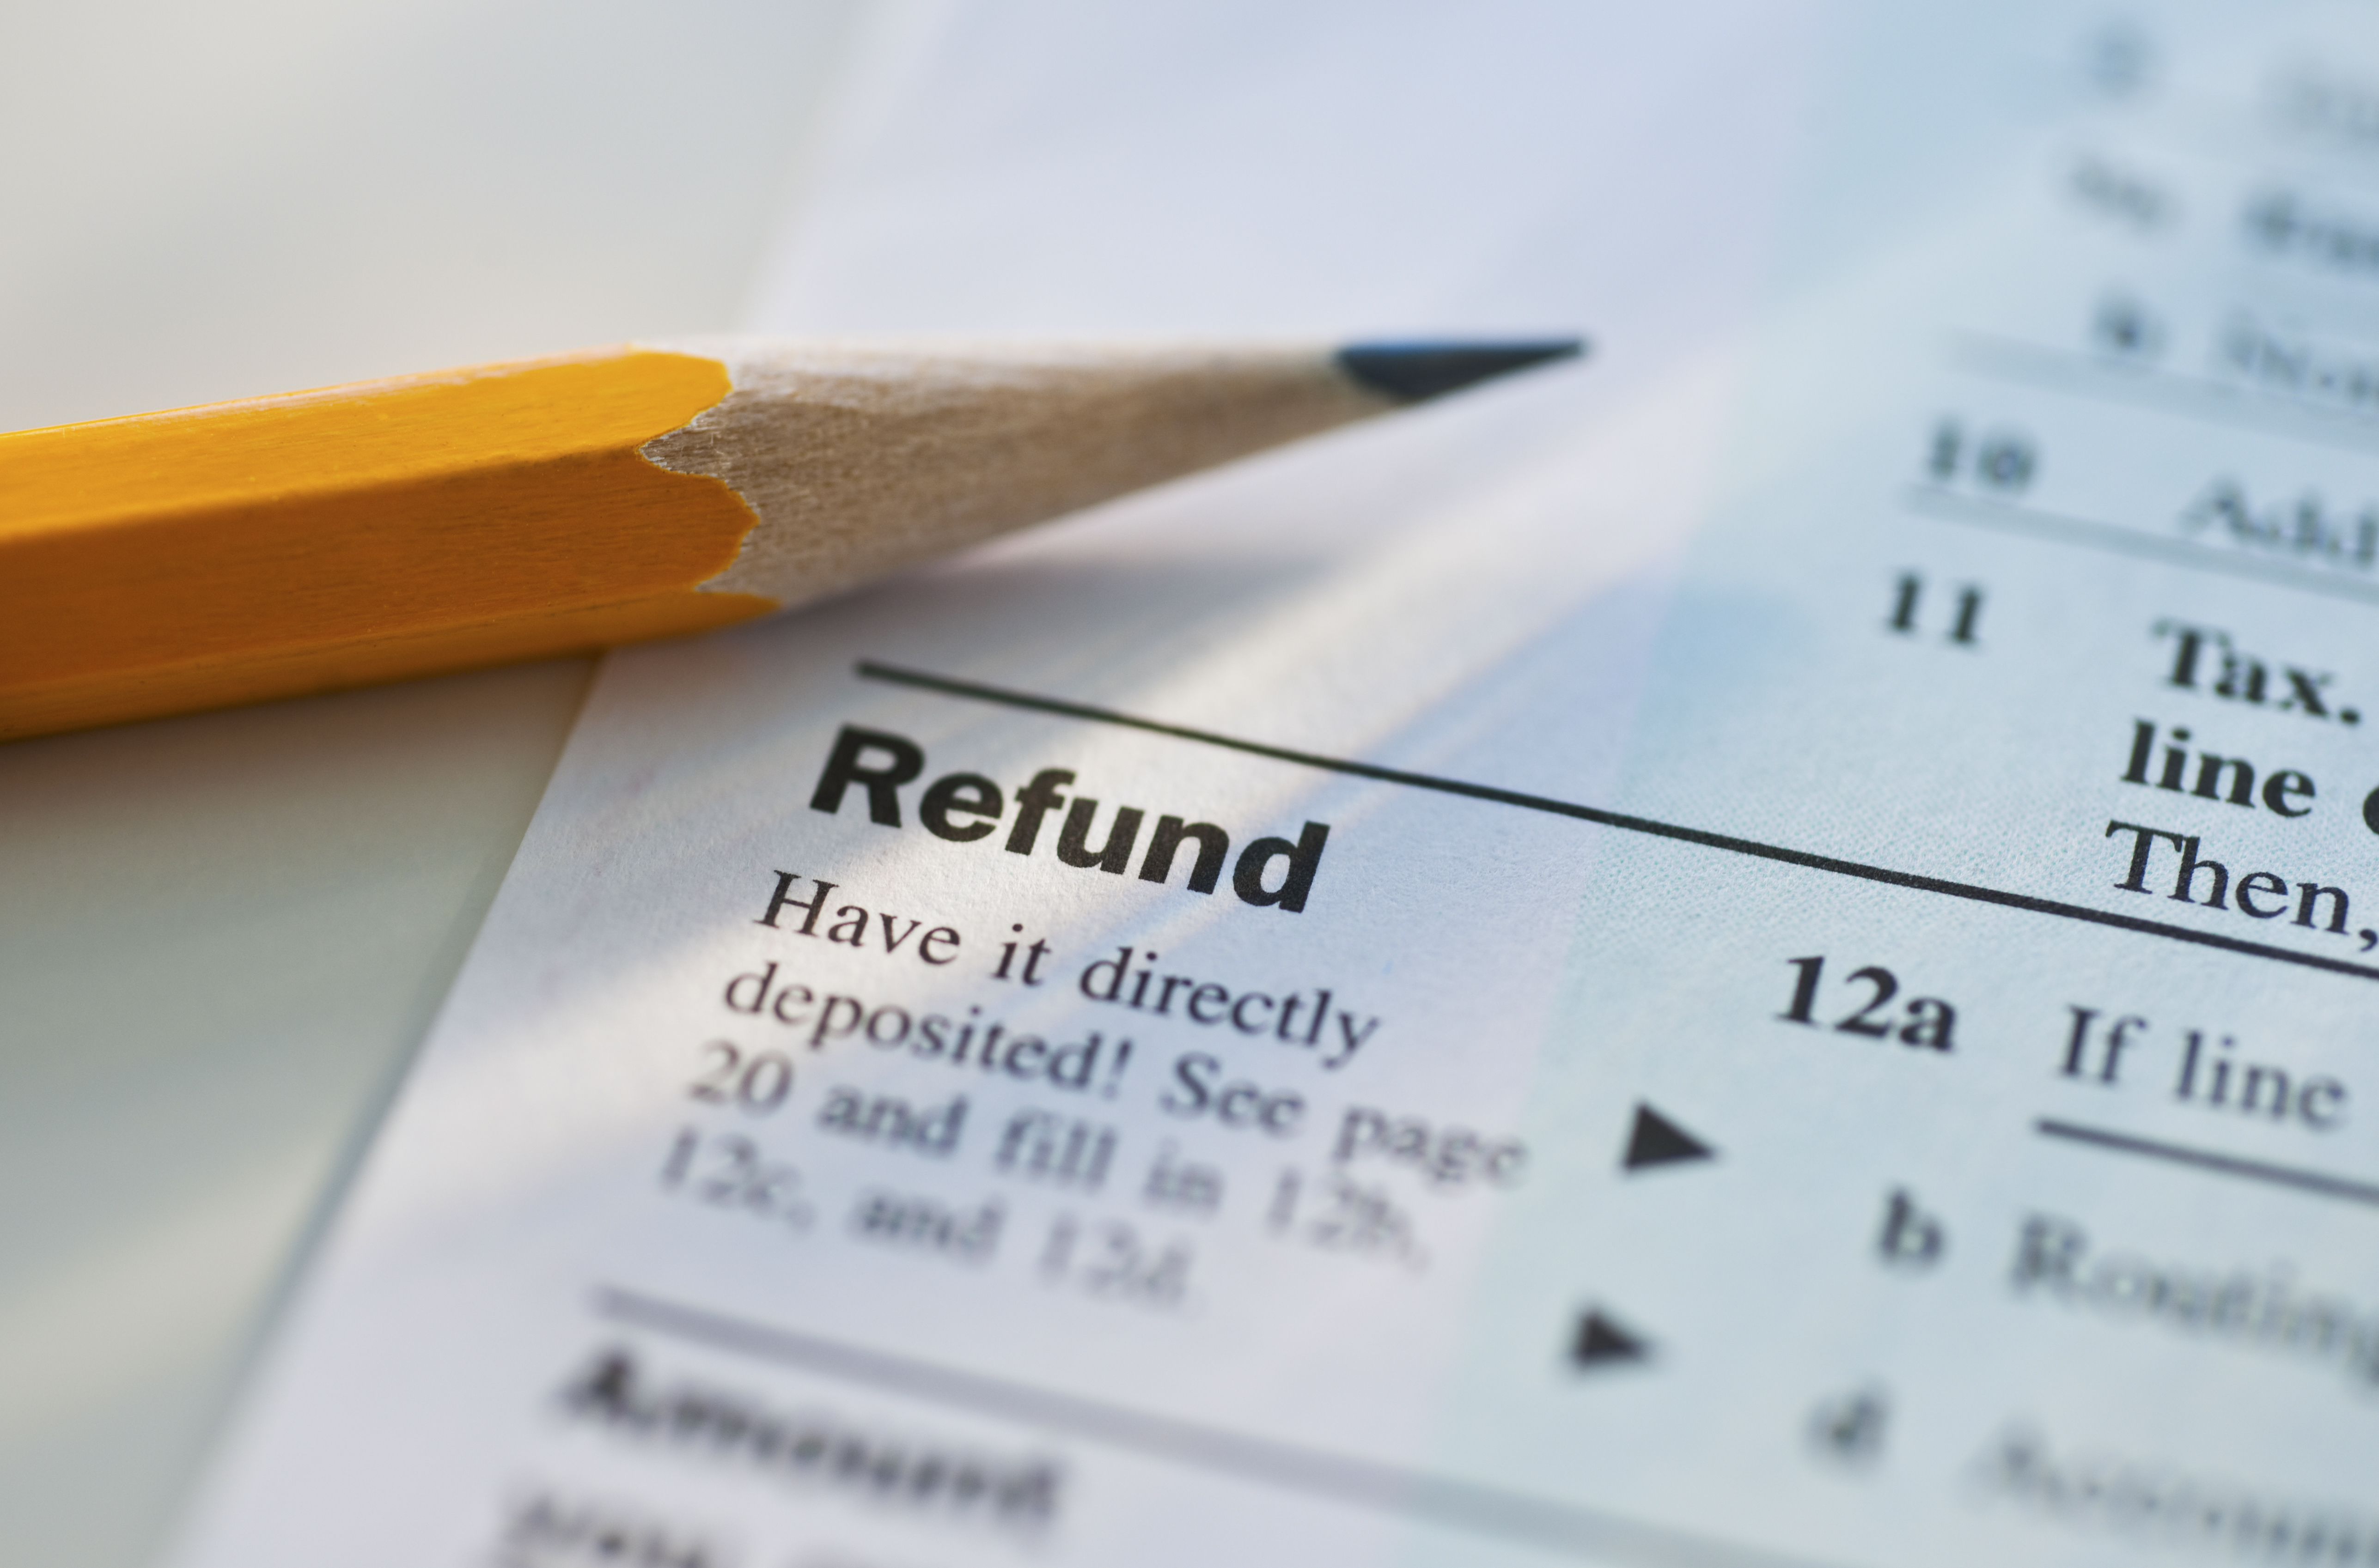 There’s a New IRS Scam That Targets Your Tax Refund. Here's How to Protect Yourself